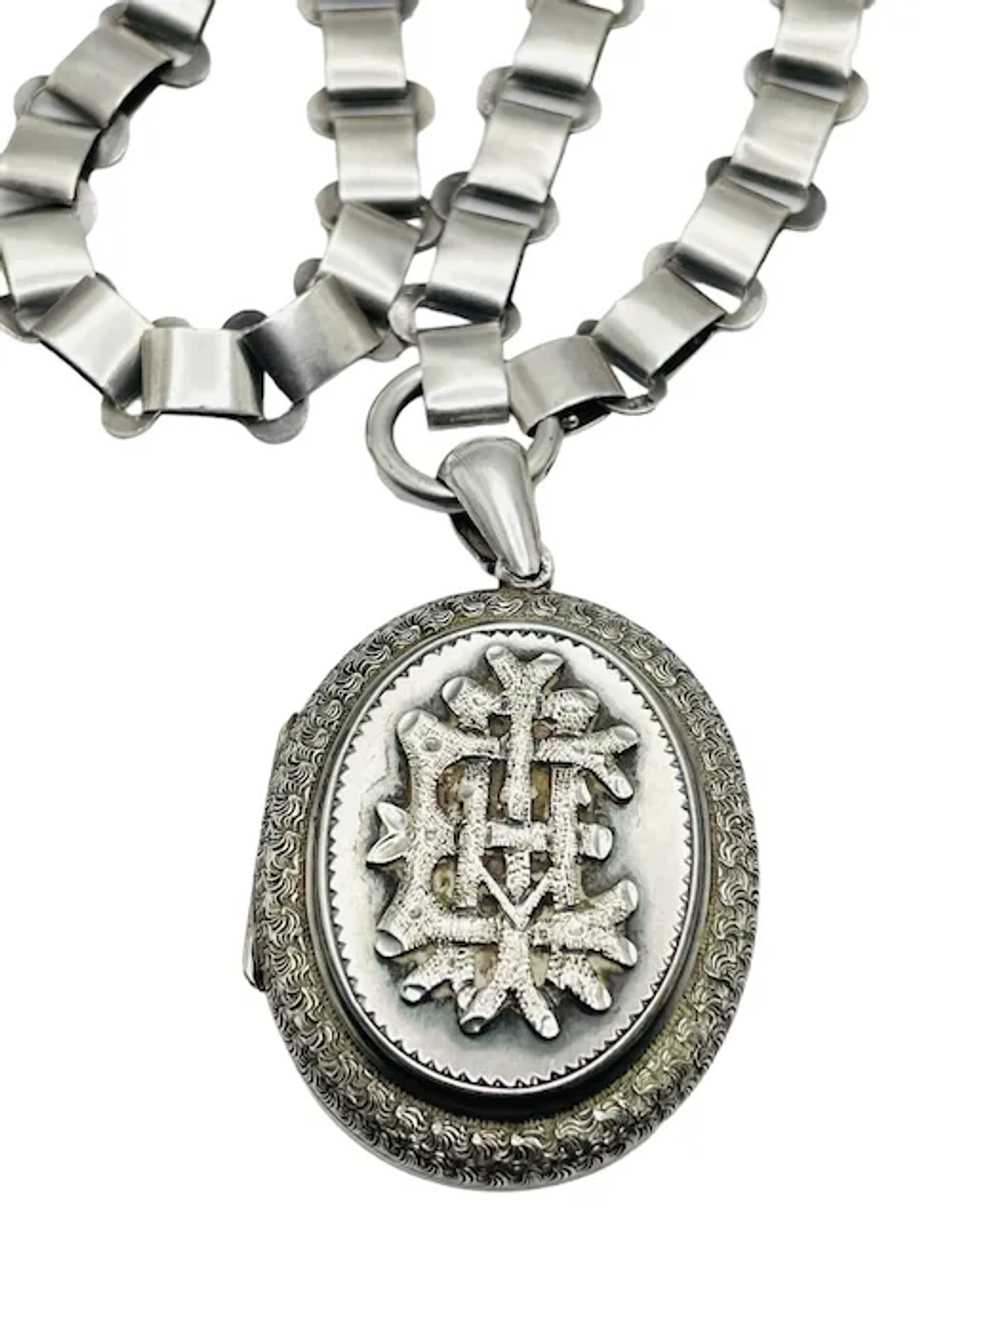 Antique Sterling Silver Locket Book Chain Necklace - image 3